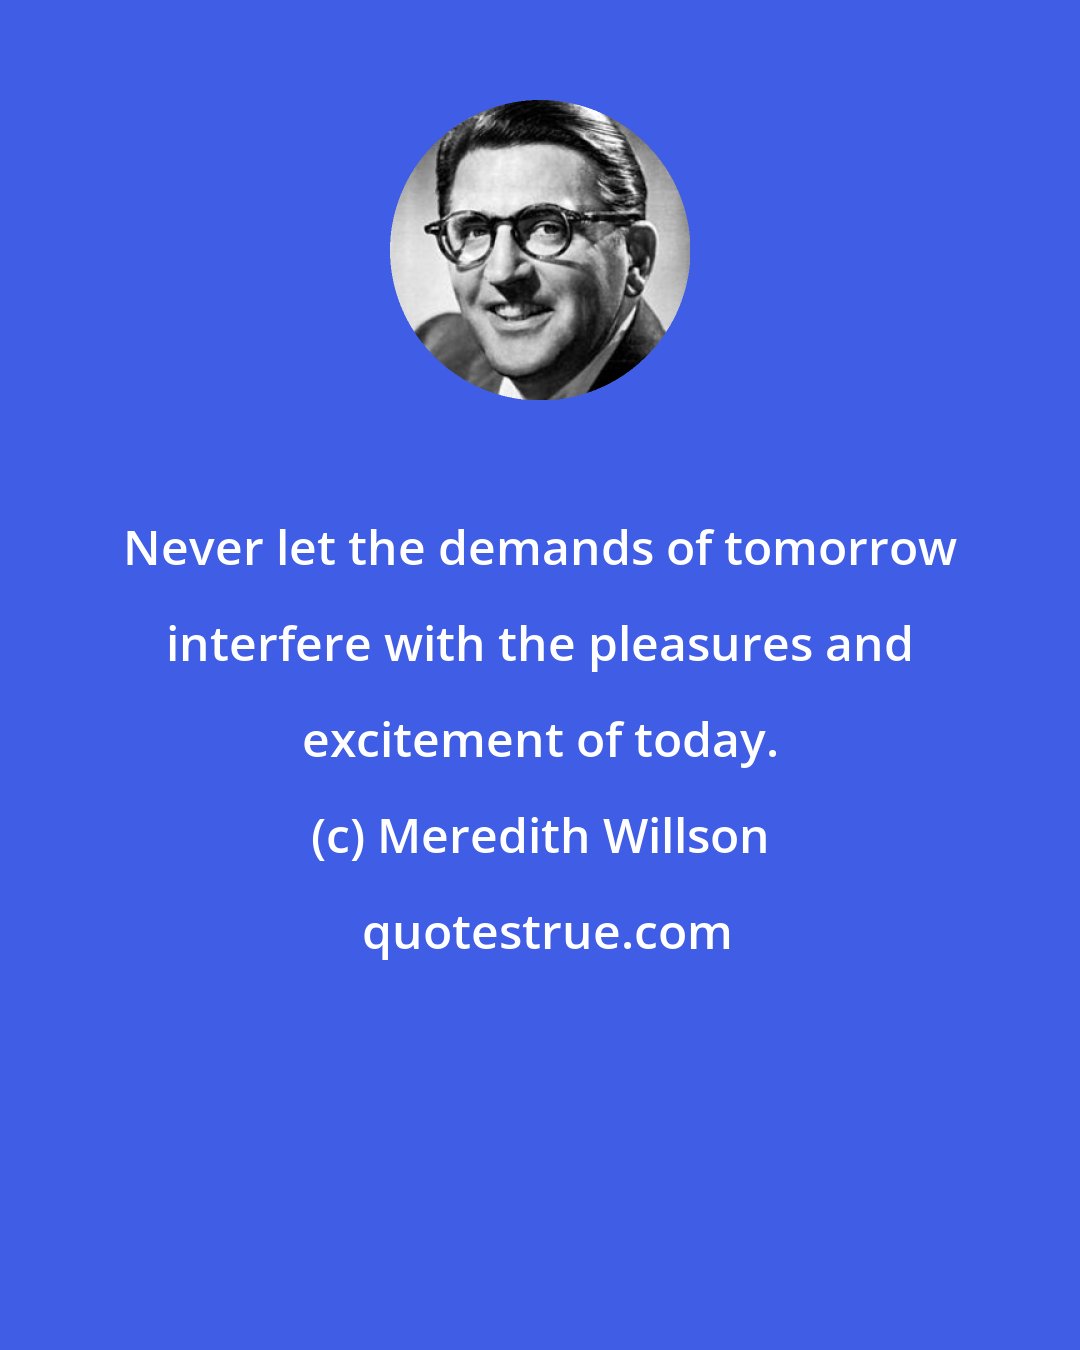 Meredith Willson: Never let the demands of tomorrow interfere with the pleasures and excitement of today.